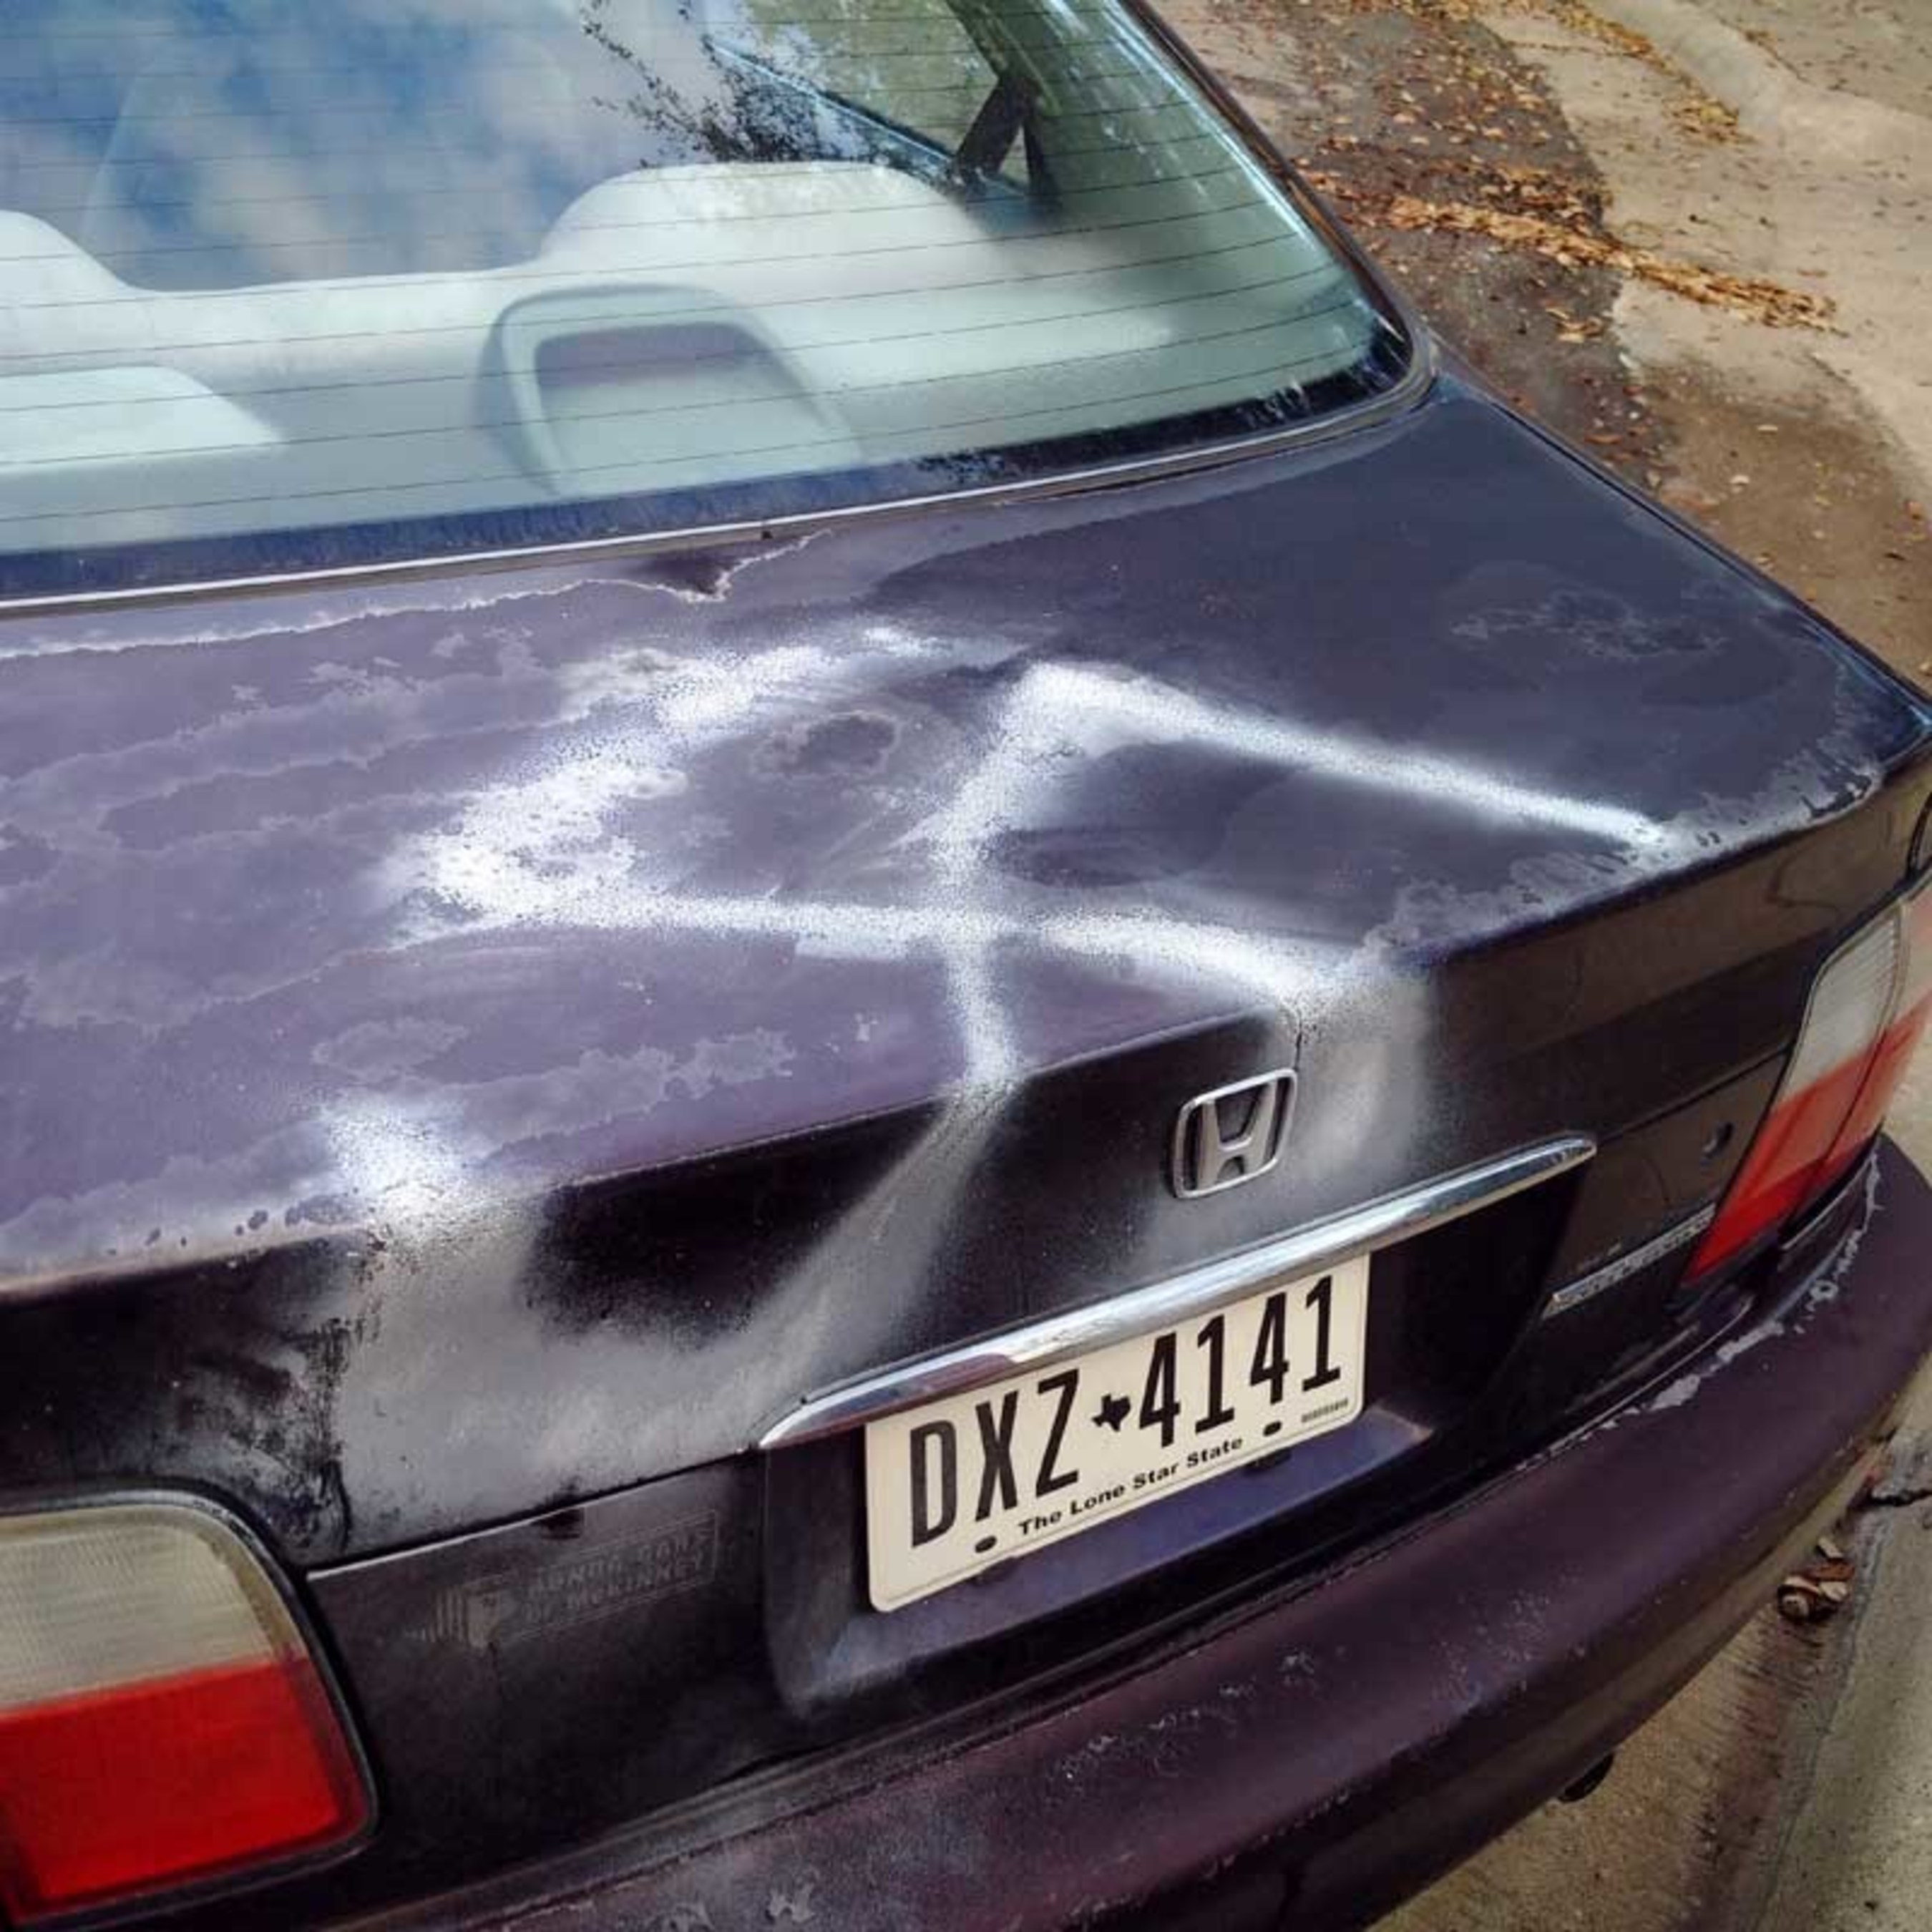 Rabbi's Car Vandalized With Swastika Following Lawsuit From City Of Dallas